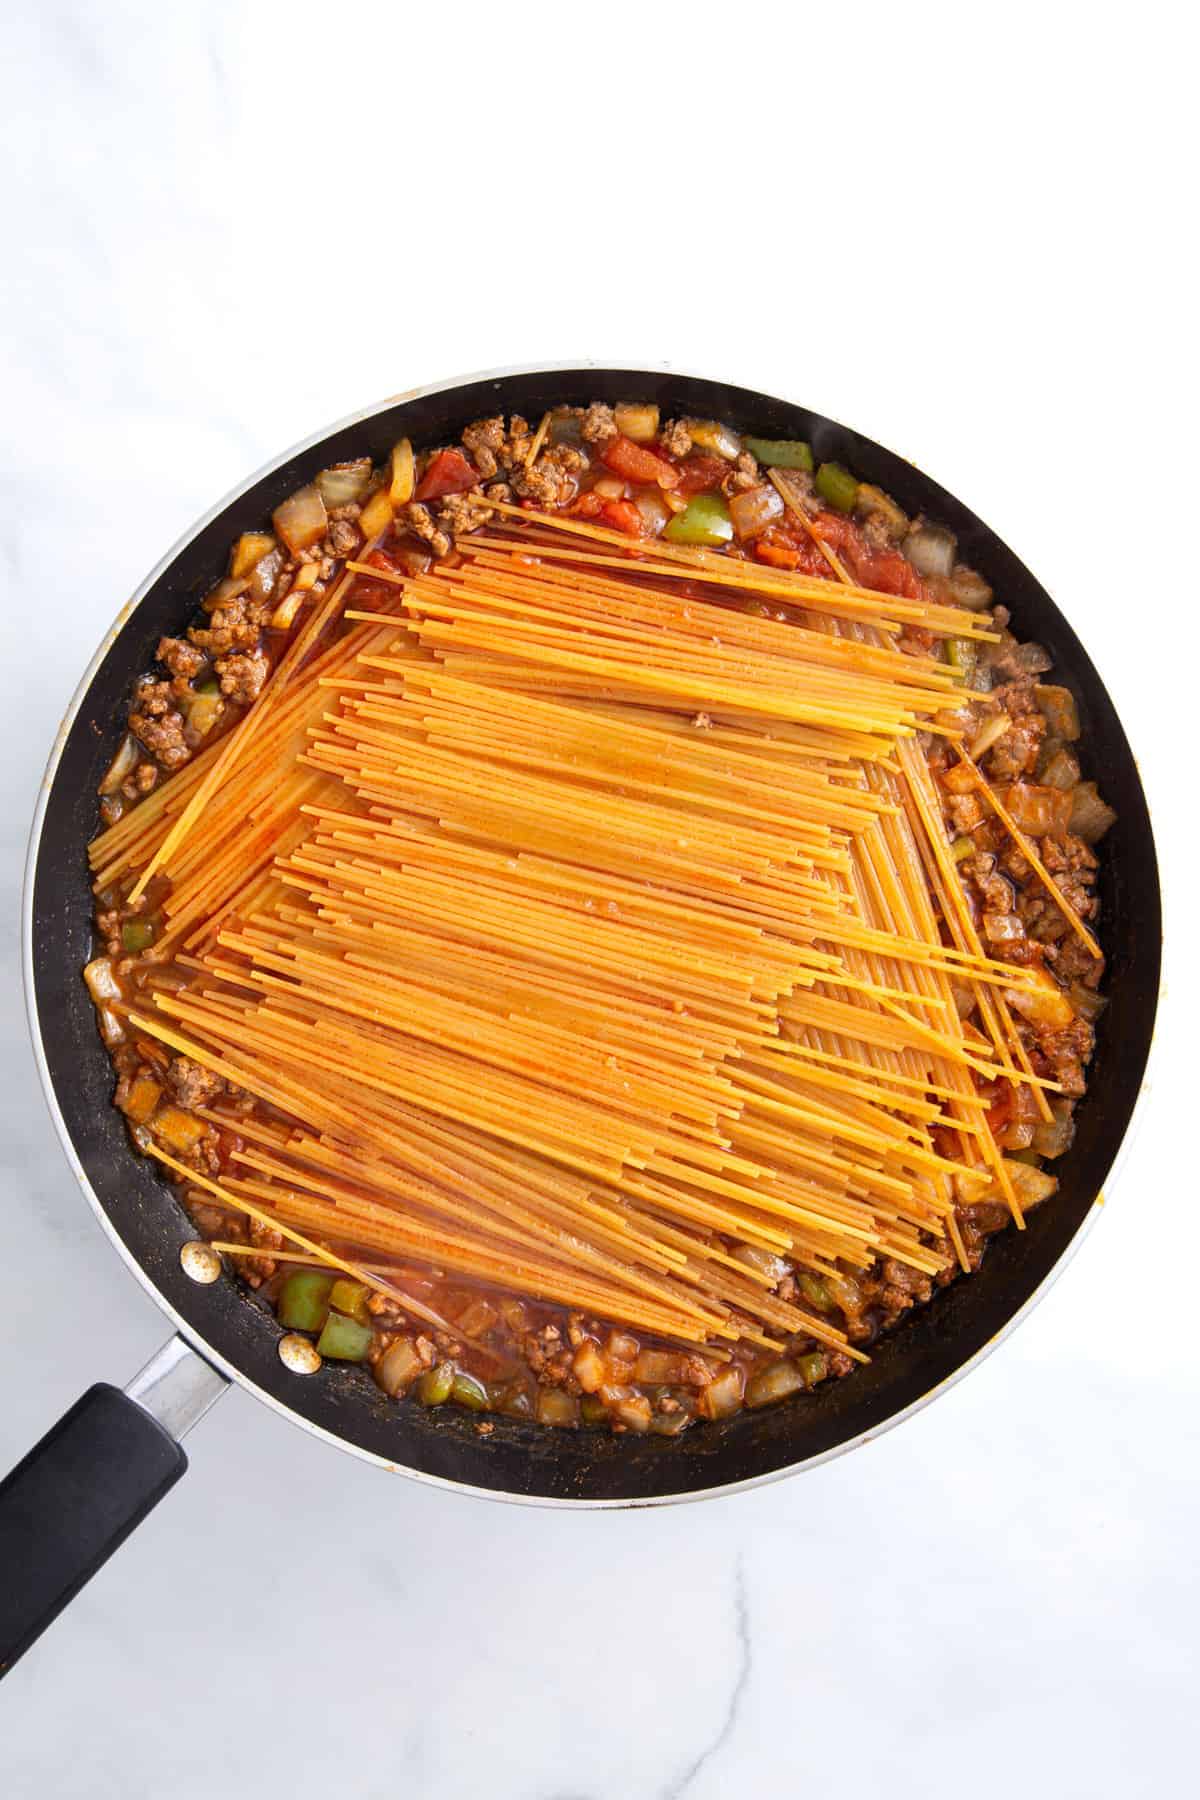 large pane of uncooked spaghetti noodles layered on top of taco meat